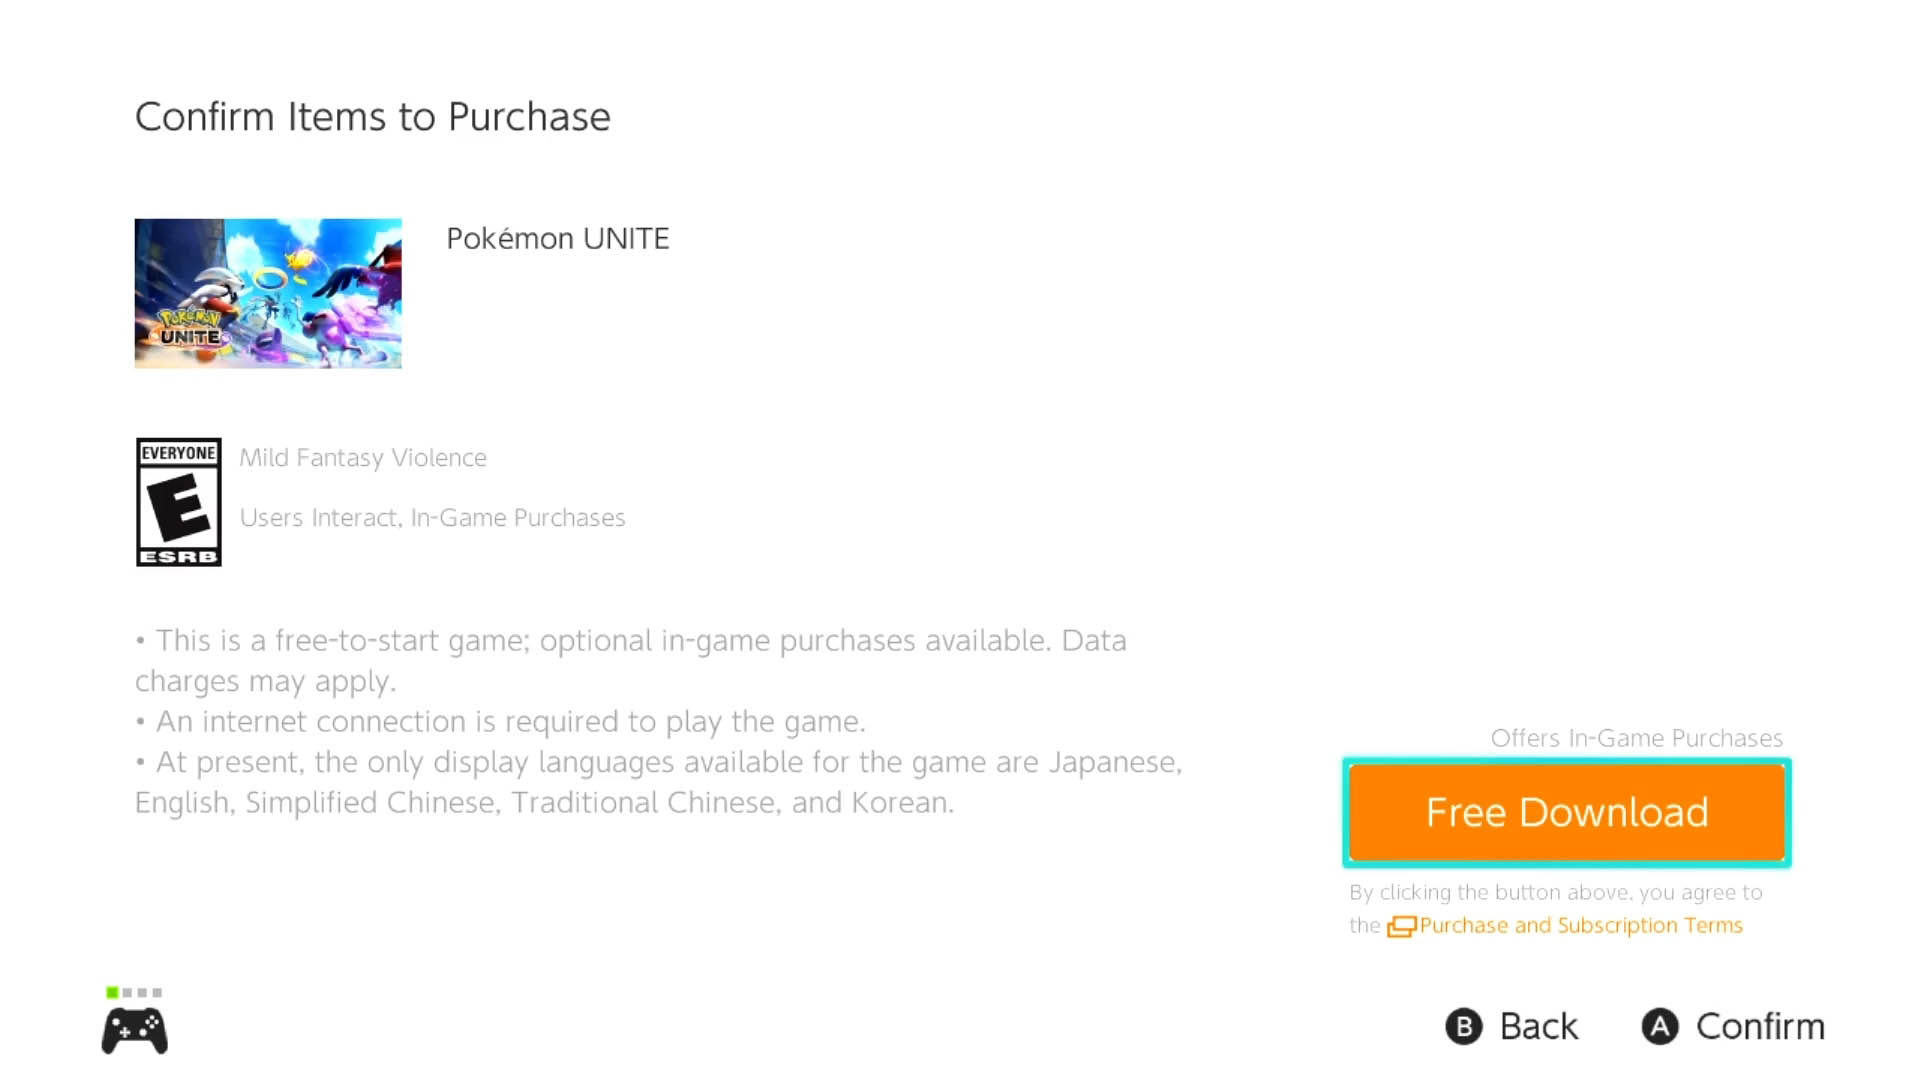 How To Download Pokémon Unite On Nintendo Switch For Free (Picture Guide)